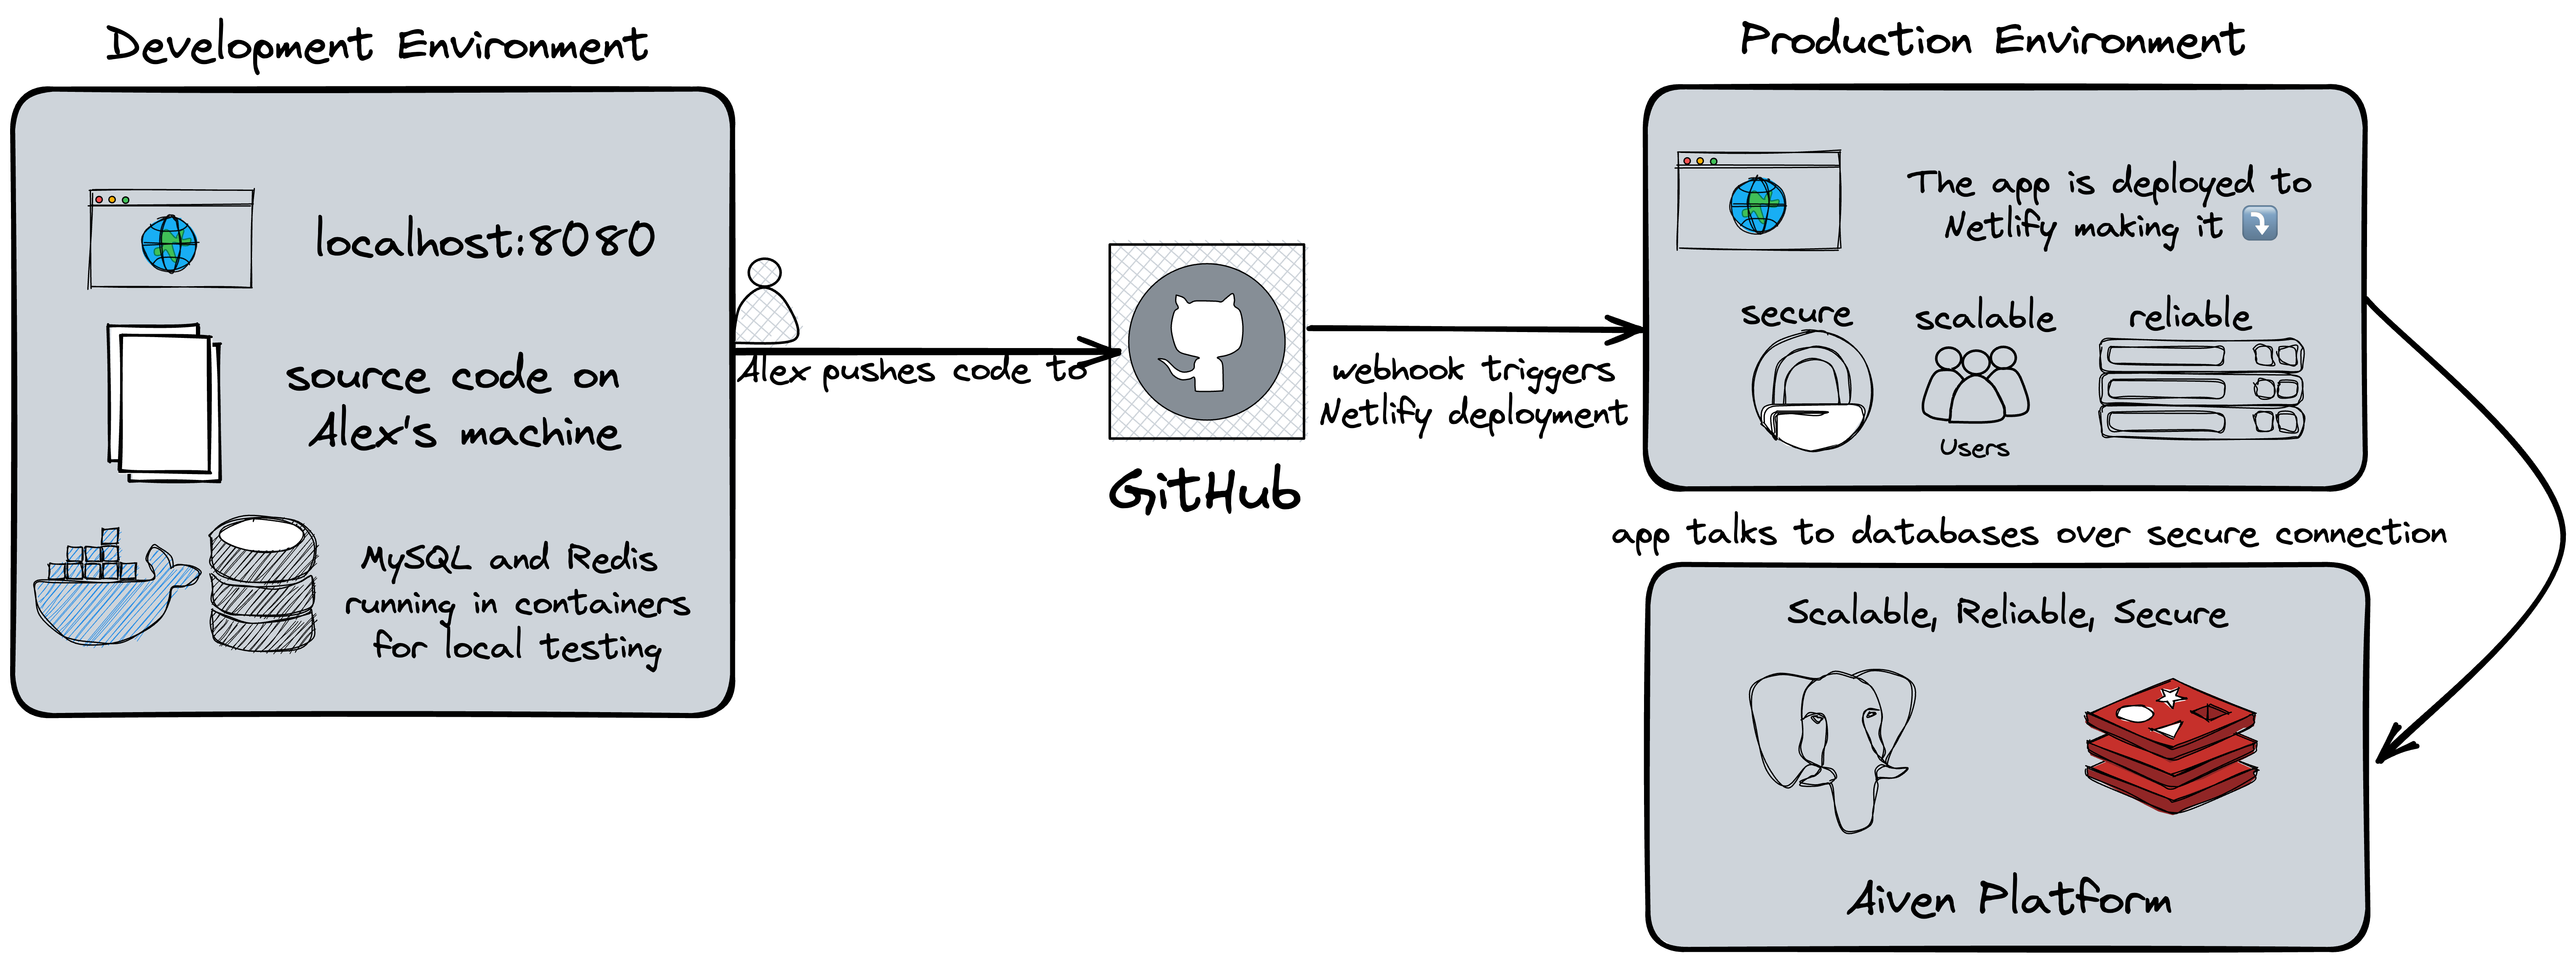 Architectural diagram for a Netlify and Aiven deployment. The left hand side shows the services in a developer's local environment, with MySQl and Redis running in local containers for testing. The developer then pushes those changes to GitHub, and on the right hand side there are two boxes describing what happens in Netlify and what happens in Aiven. The app is deployed to Netlify, which handles security, scalability and robustness for the front-end. The Redis and MySQL databases are deployed using Aiven and the app communicates with Aiven over a secure connection.